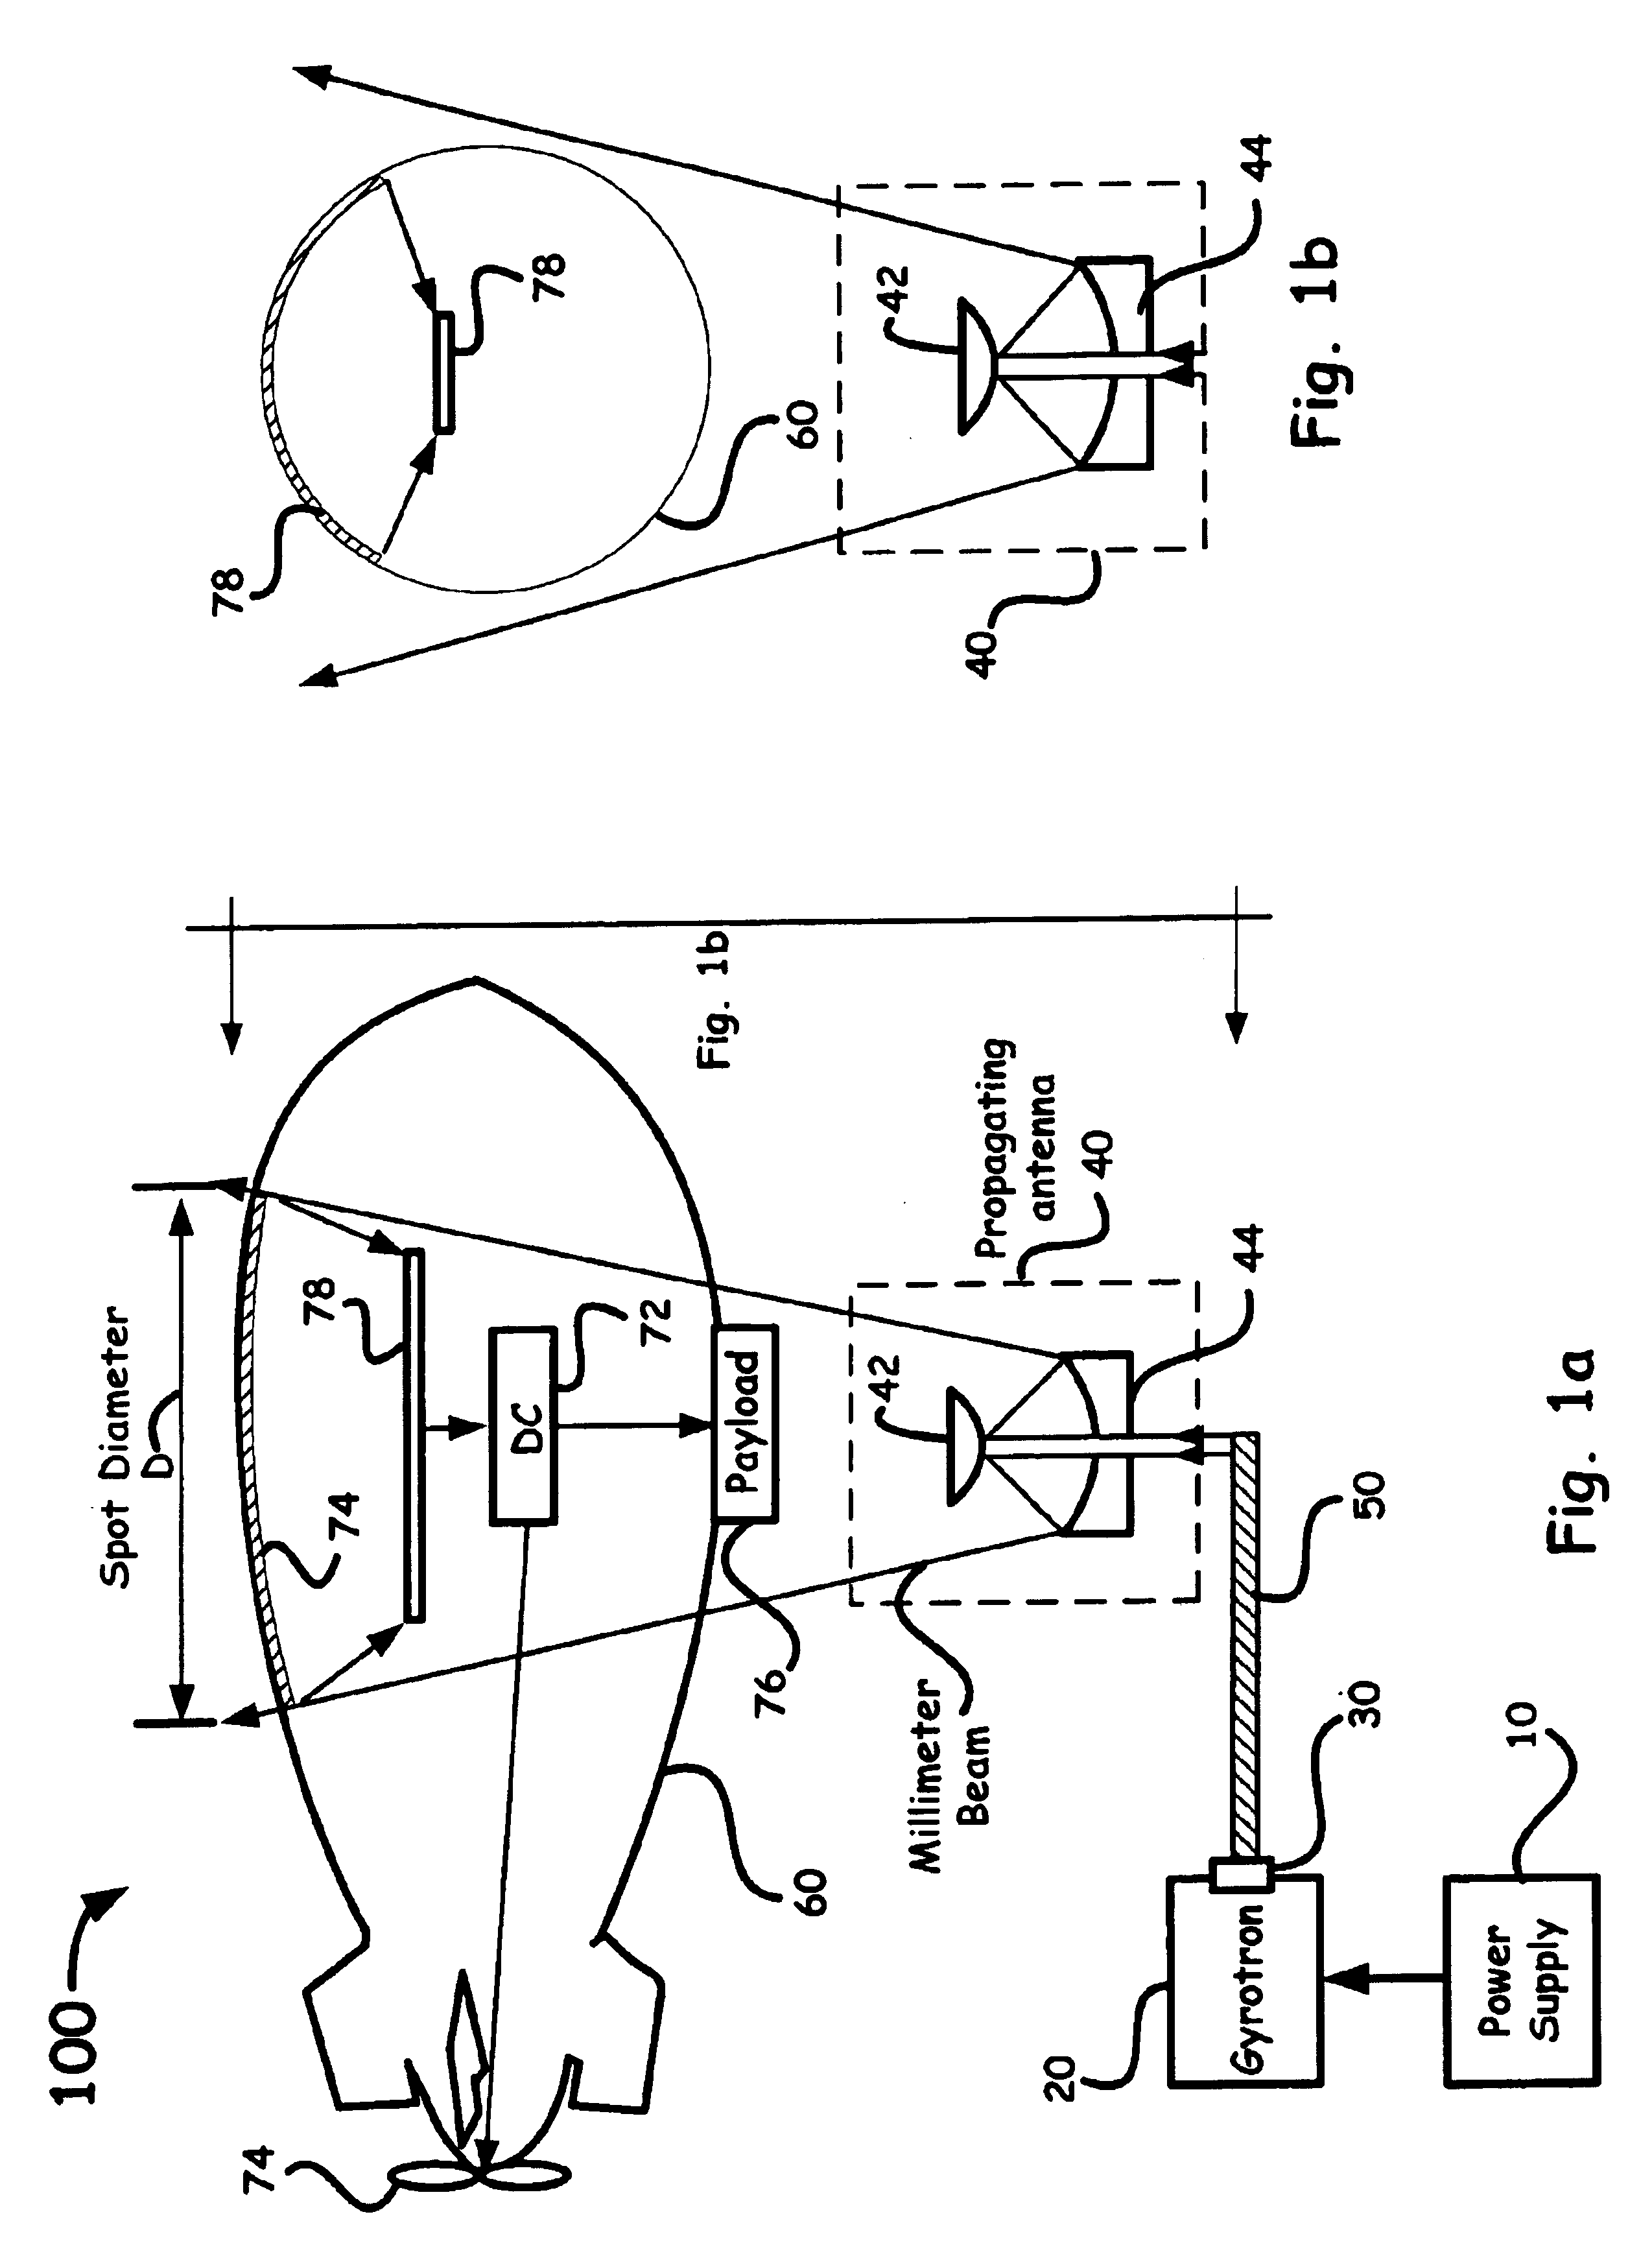 System using a megawatt class millimeter wave source and a high-power rectenna to beam power to a suspended platform